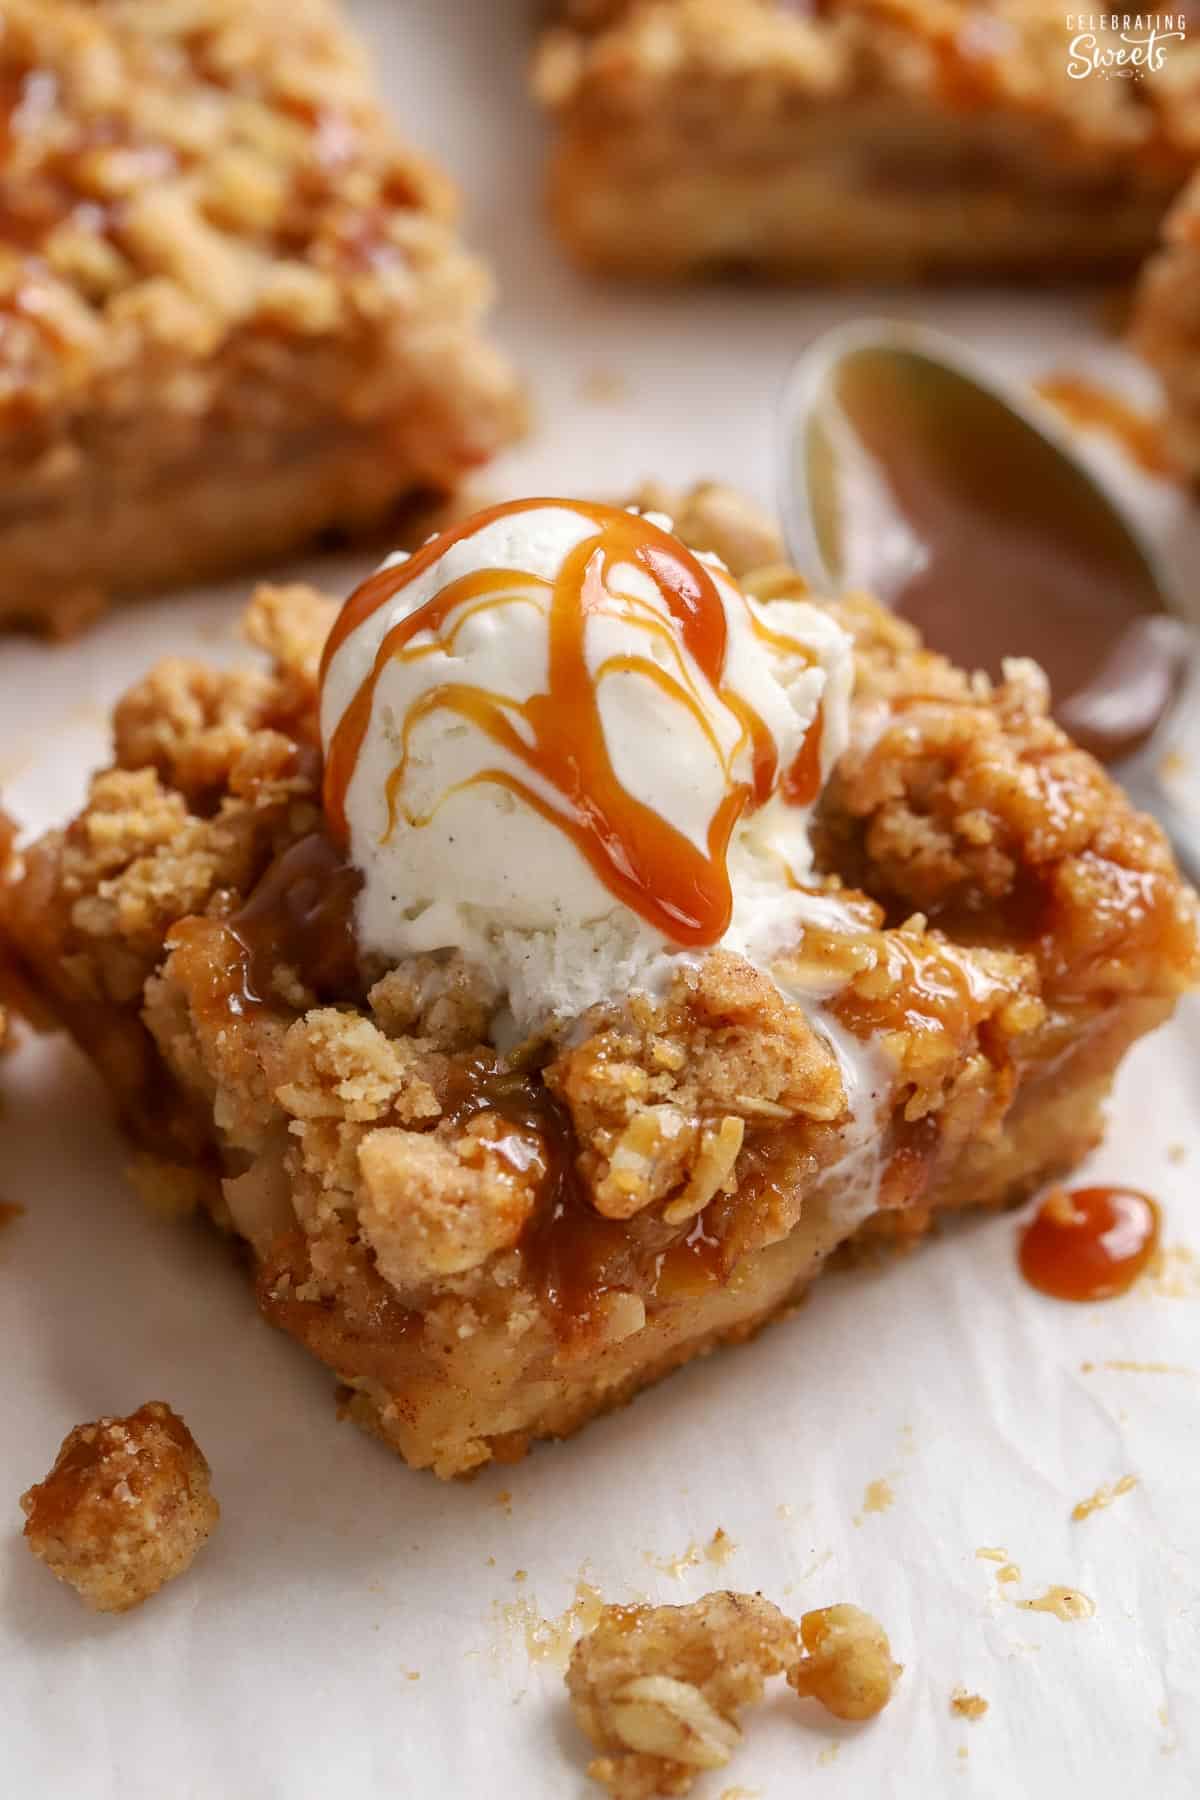 Apple crumb bar topped with a scoop of vanilla ice cream and caramel sauce.